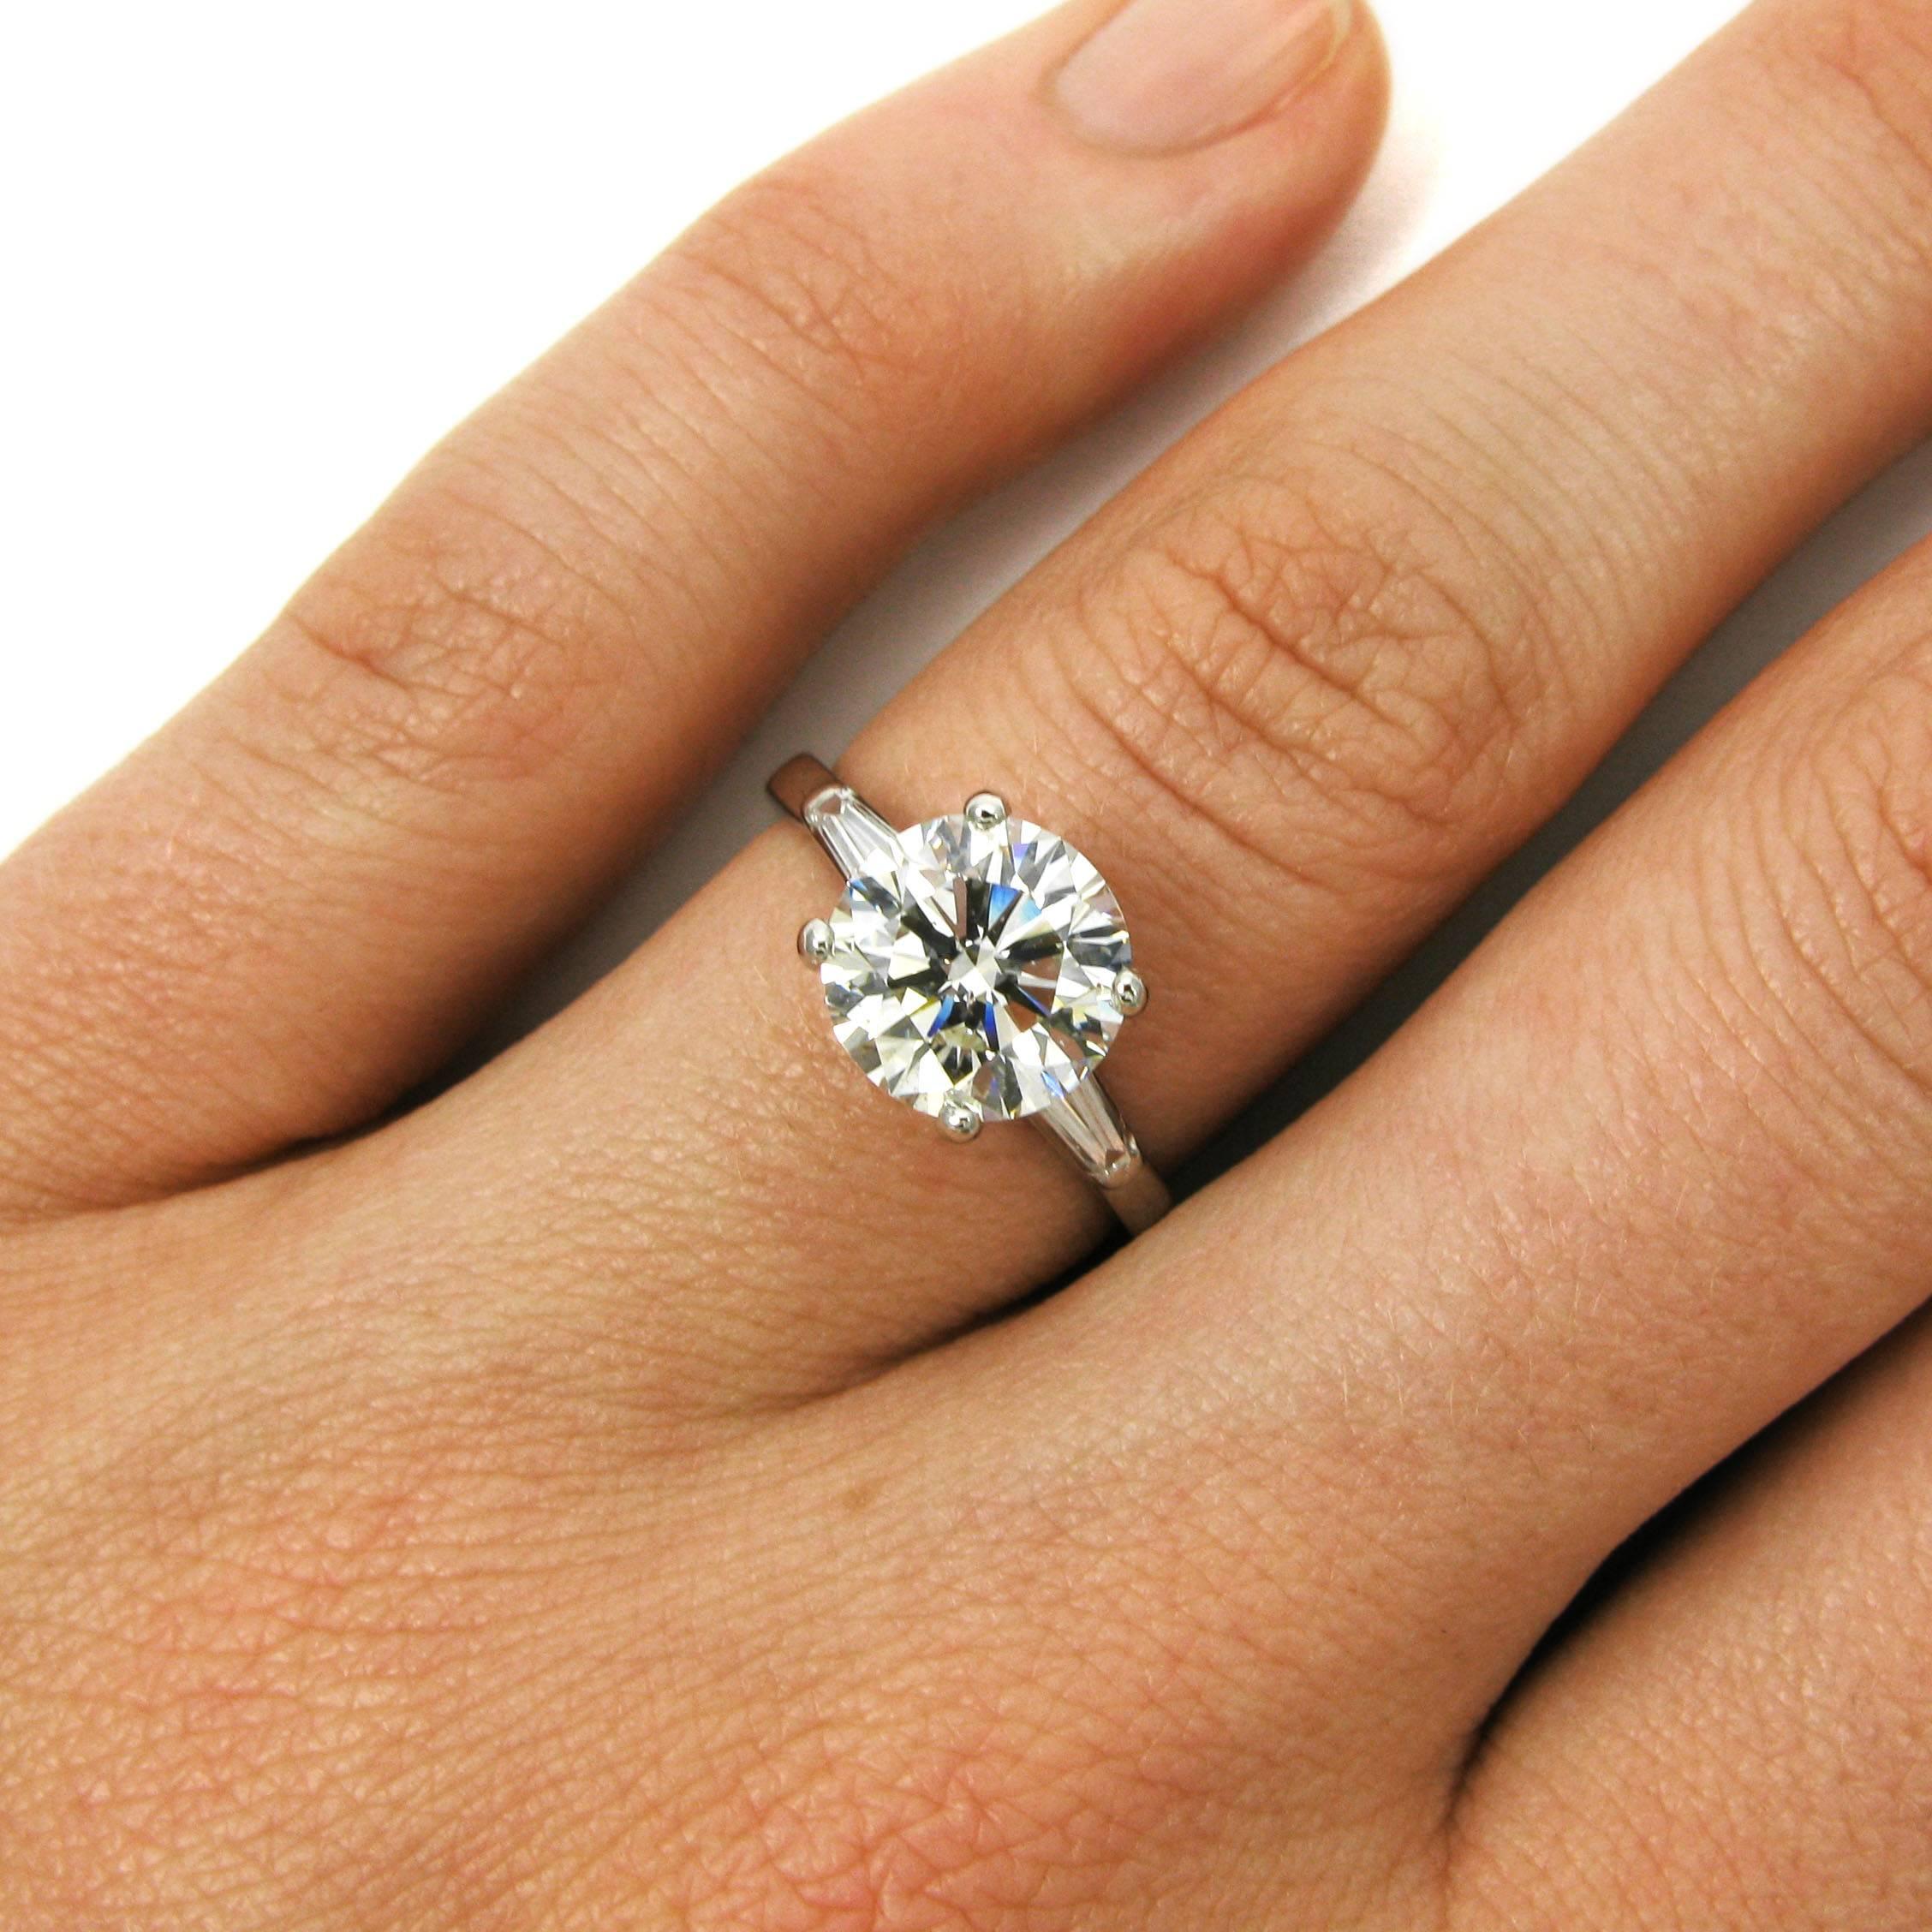 A vintage diamond ring by American jeweler Tiffany & Co. This classic ring features a 2.50 carat round brilliant-cut diamond with H color and VVS2 clarity flanked by two tapered baguette-cut diamonds totaling approx. 0.40 carat. Mounted in platinum,